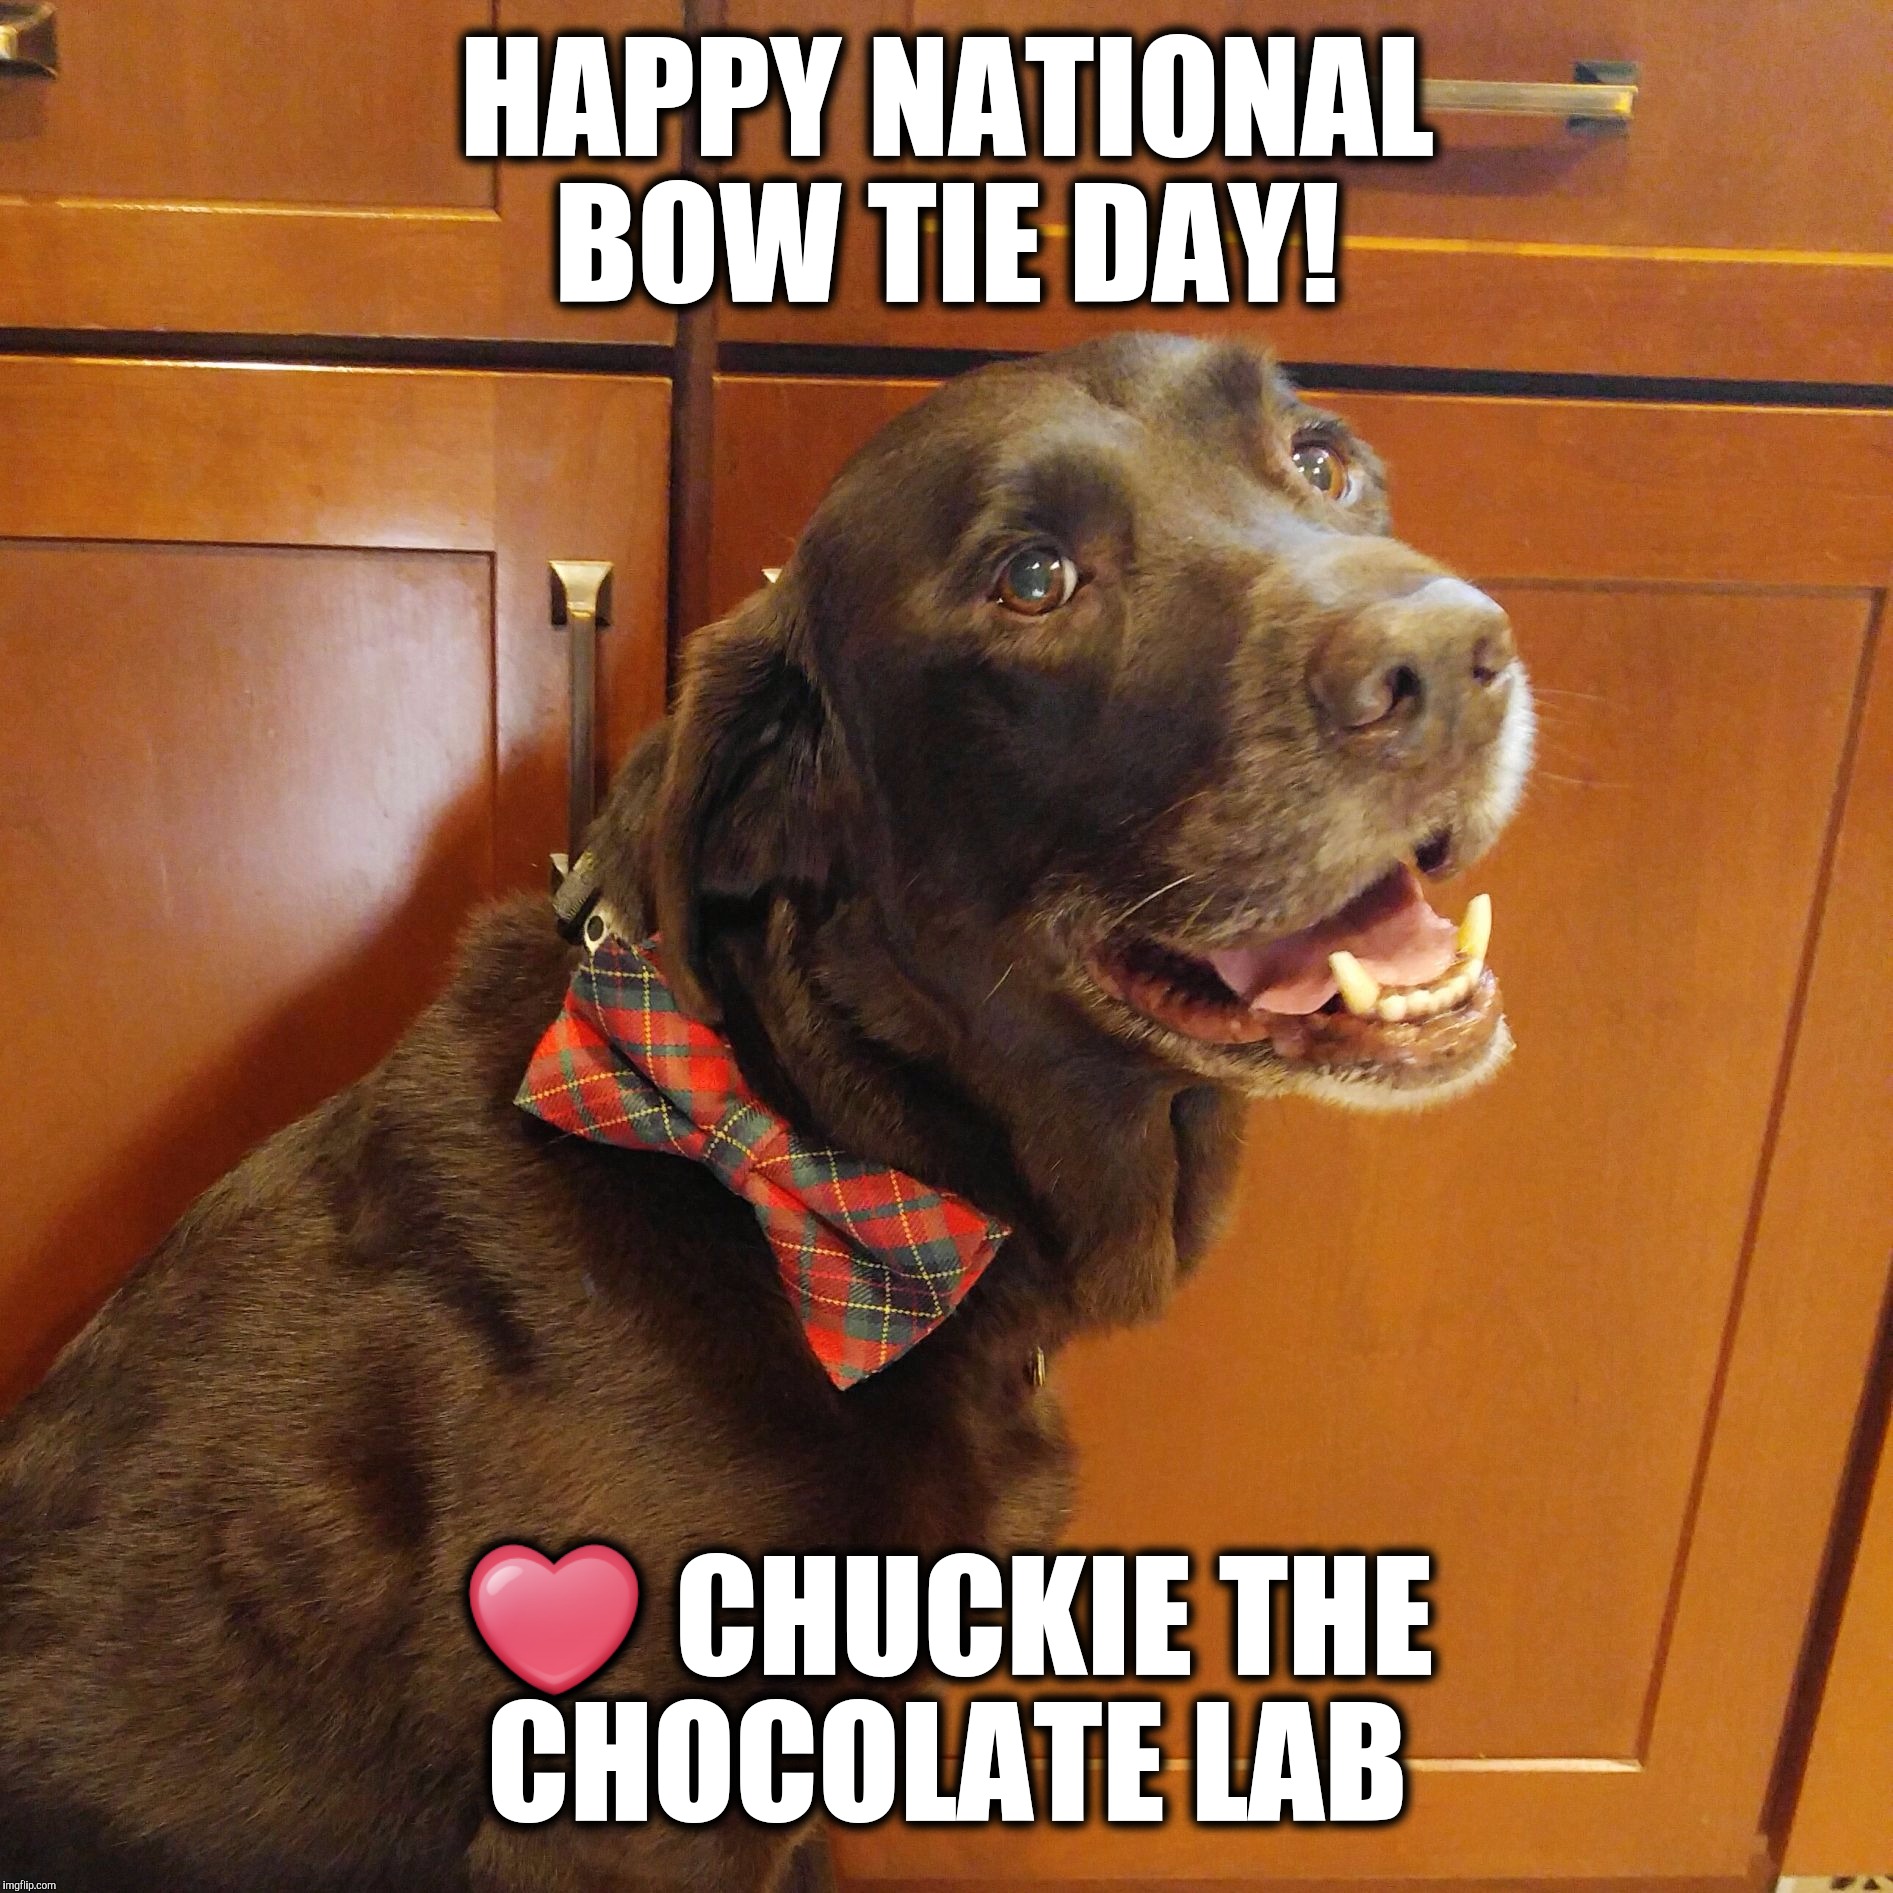 Happy National Bow Tie Day!  | HAPPY NATIONAL BOW TIE DAY! ❤️ CHUCKIE THE CHOCOLATE LAB | image tagged in chuckie the chocolate lab,bow tie,national,labrador,bow tie day,dog | made w/ Imgflip meme maker